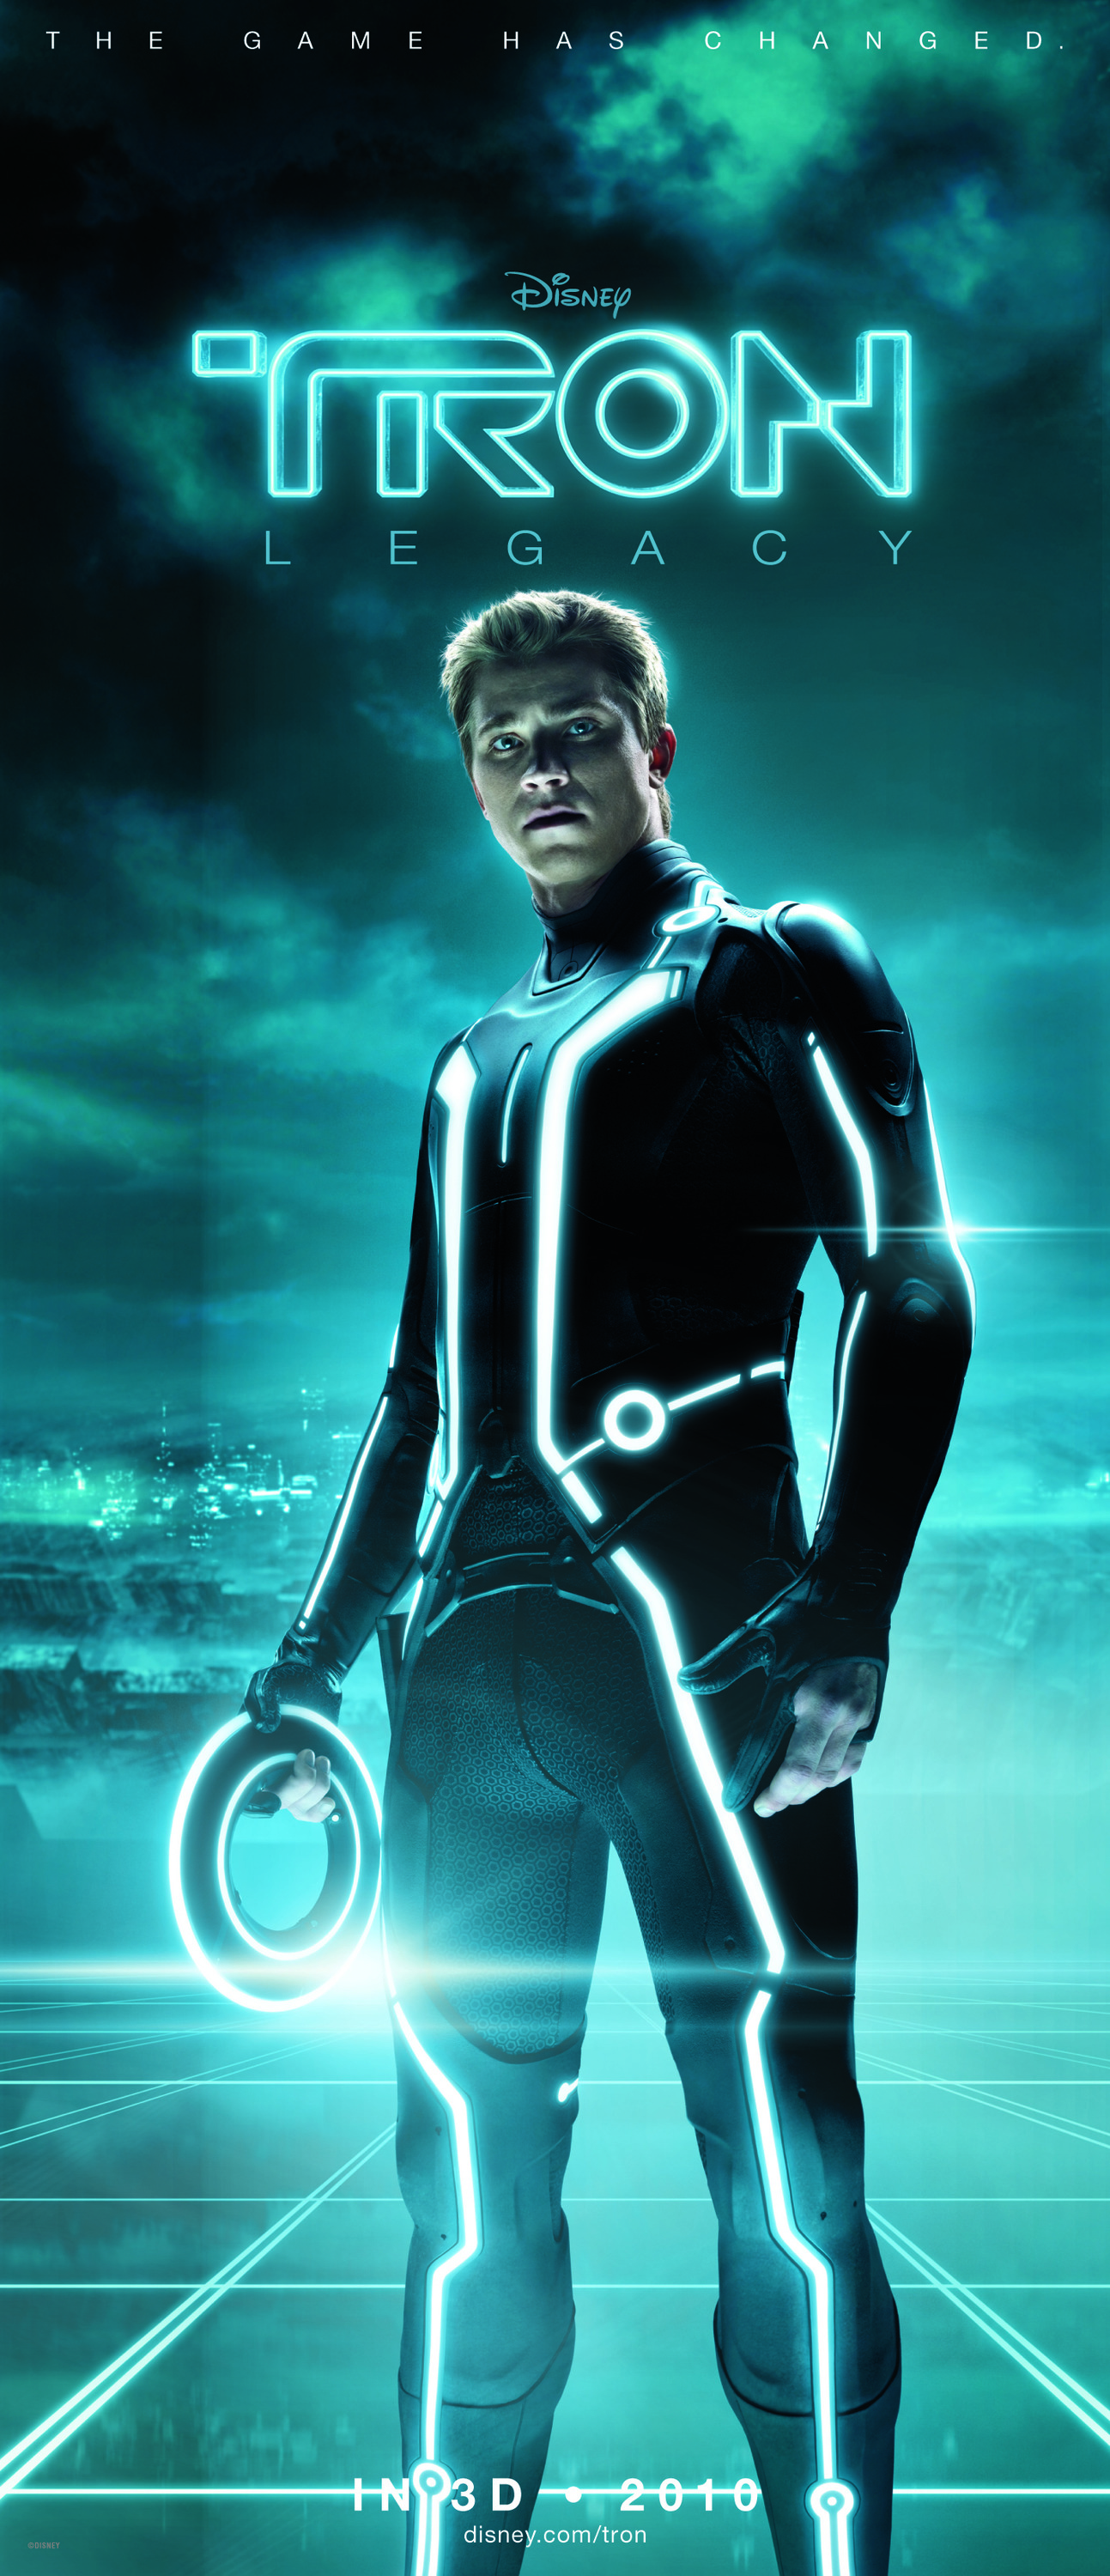 Mega Sized Movie Poster Image for Tron Legacy (#10 of 26)